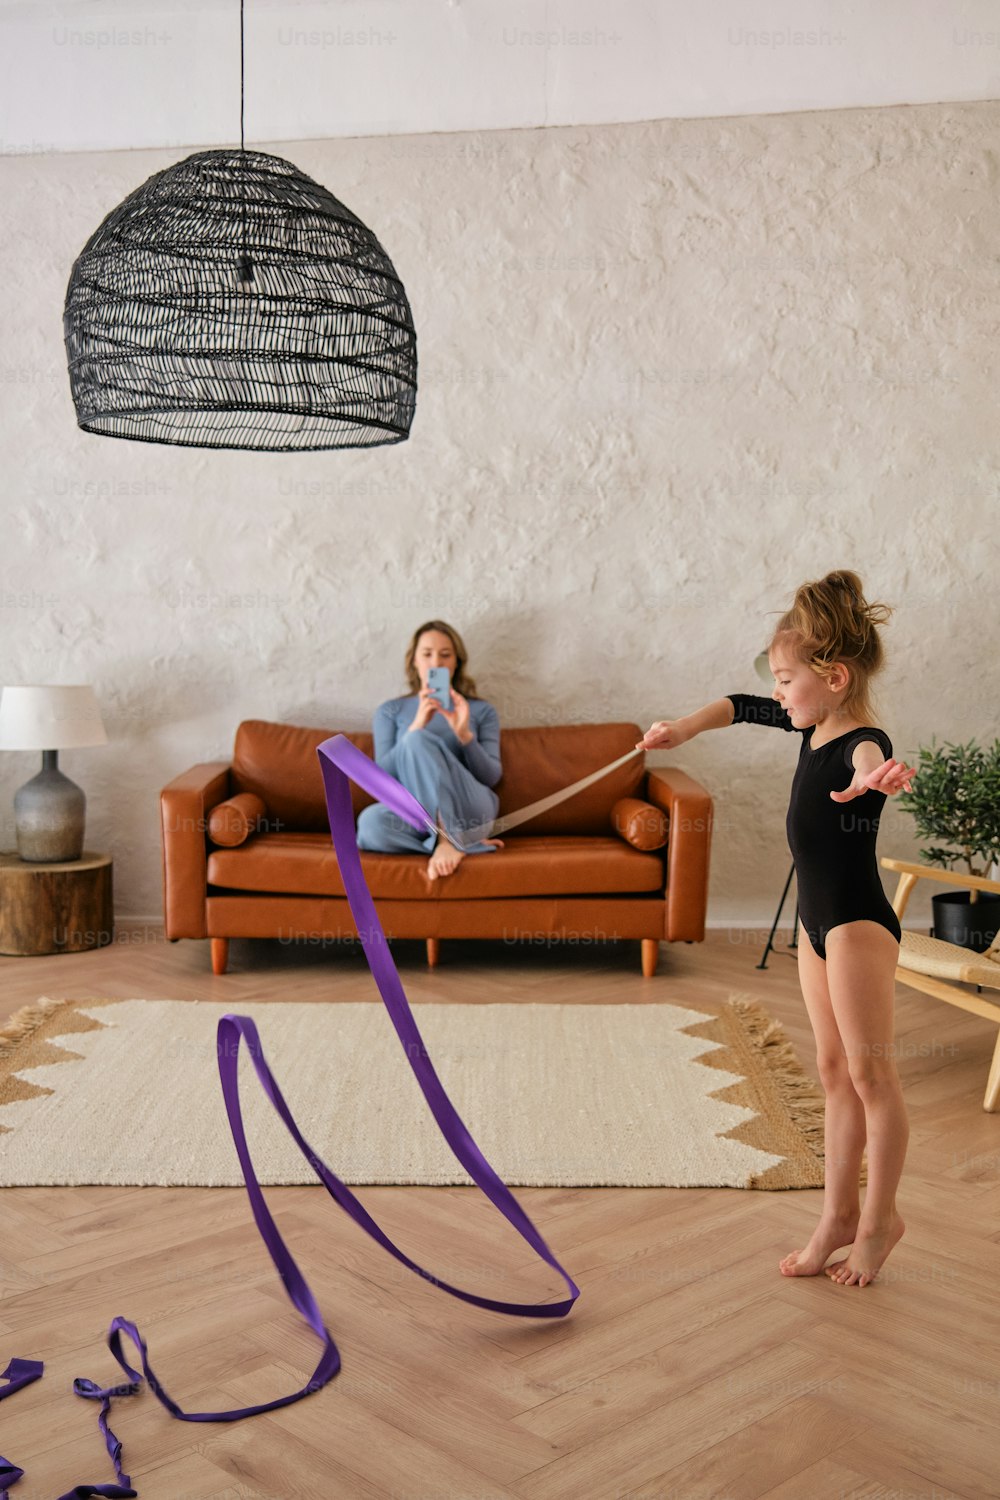 a girl is playing with a purple ribbon in a living room